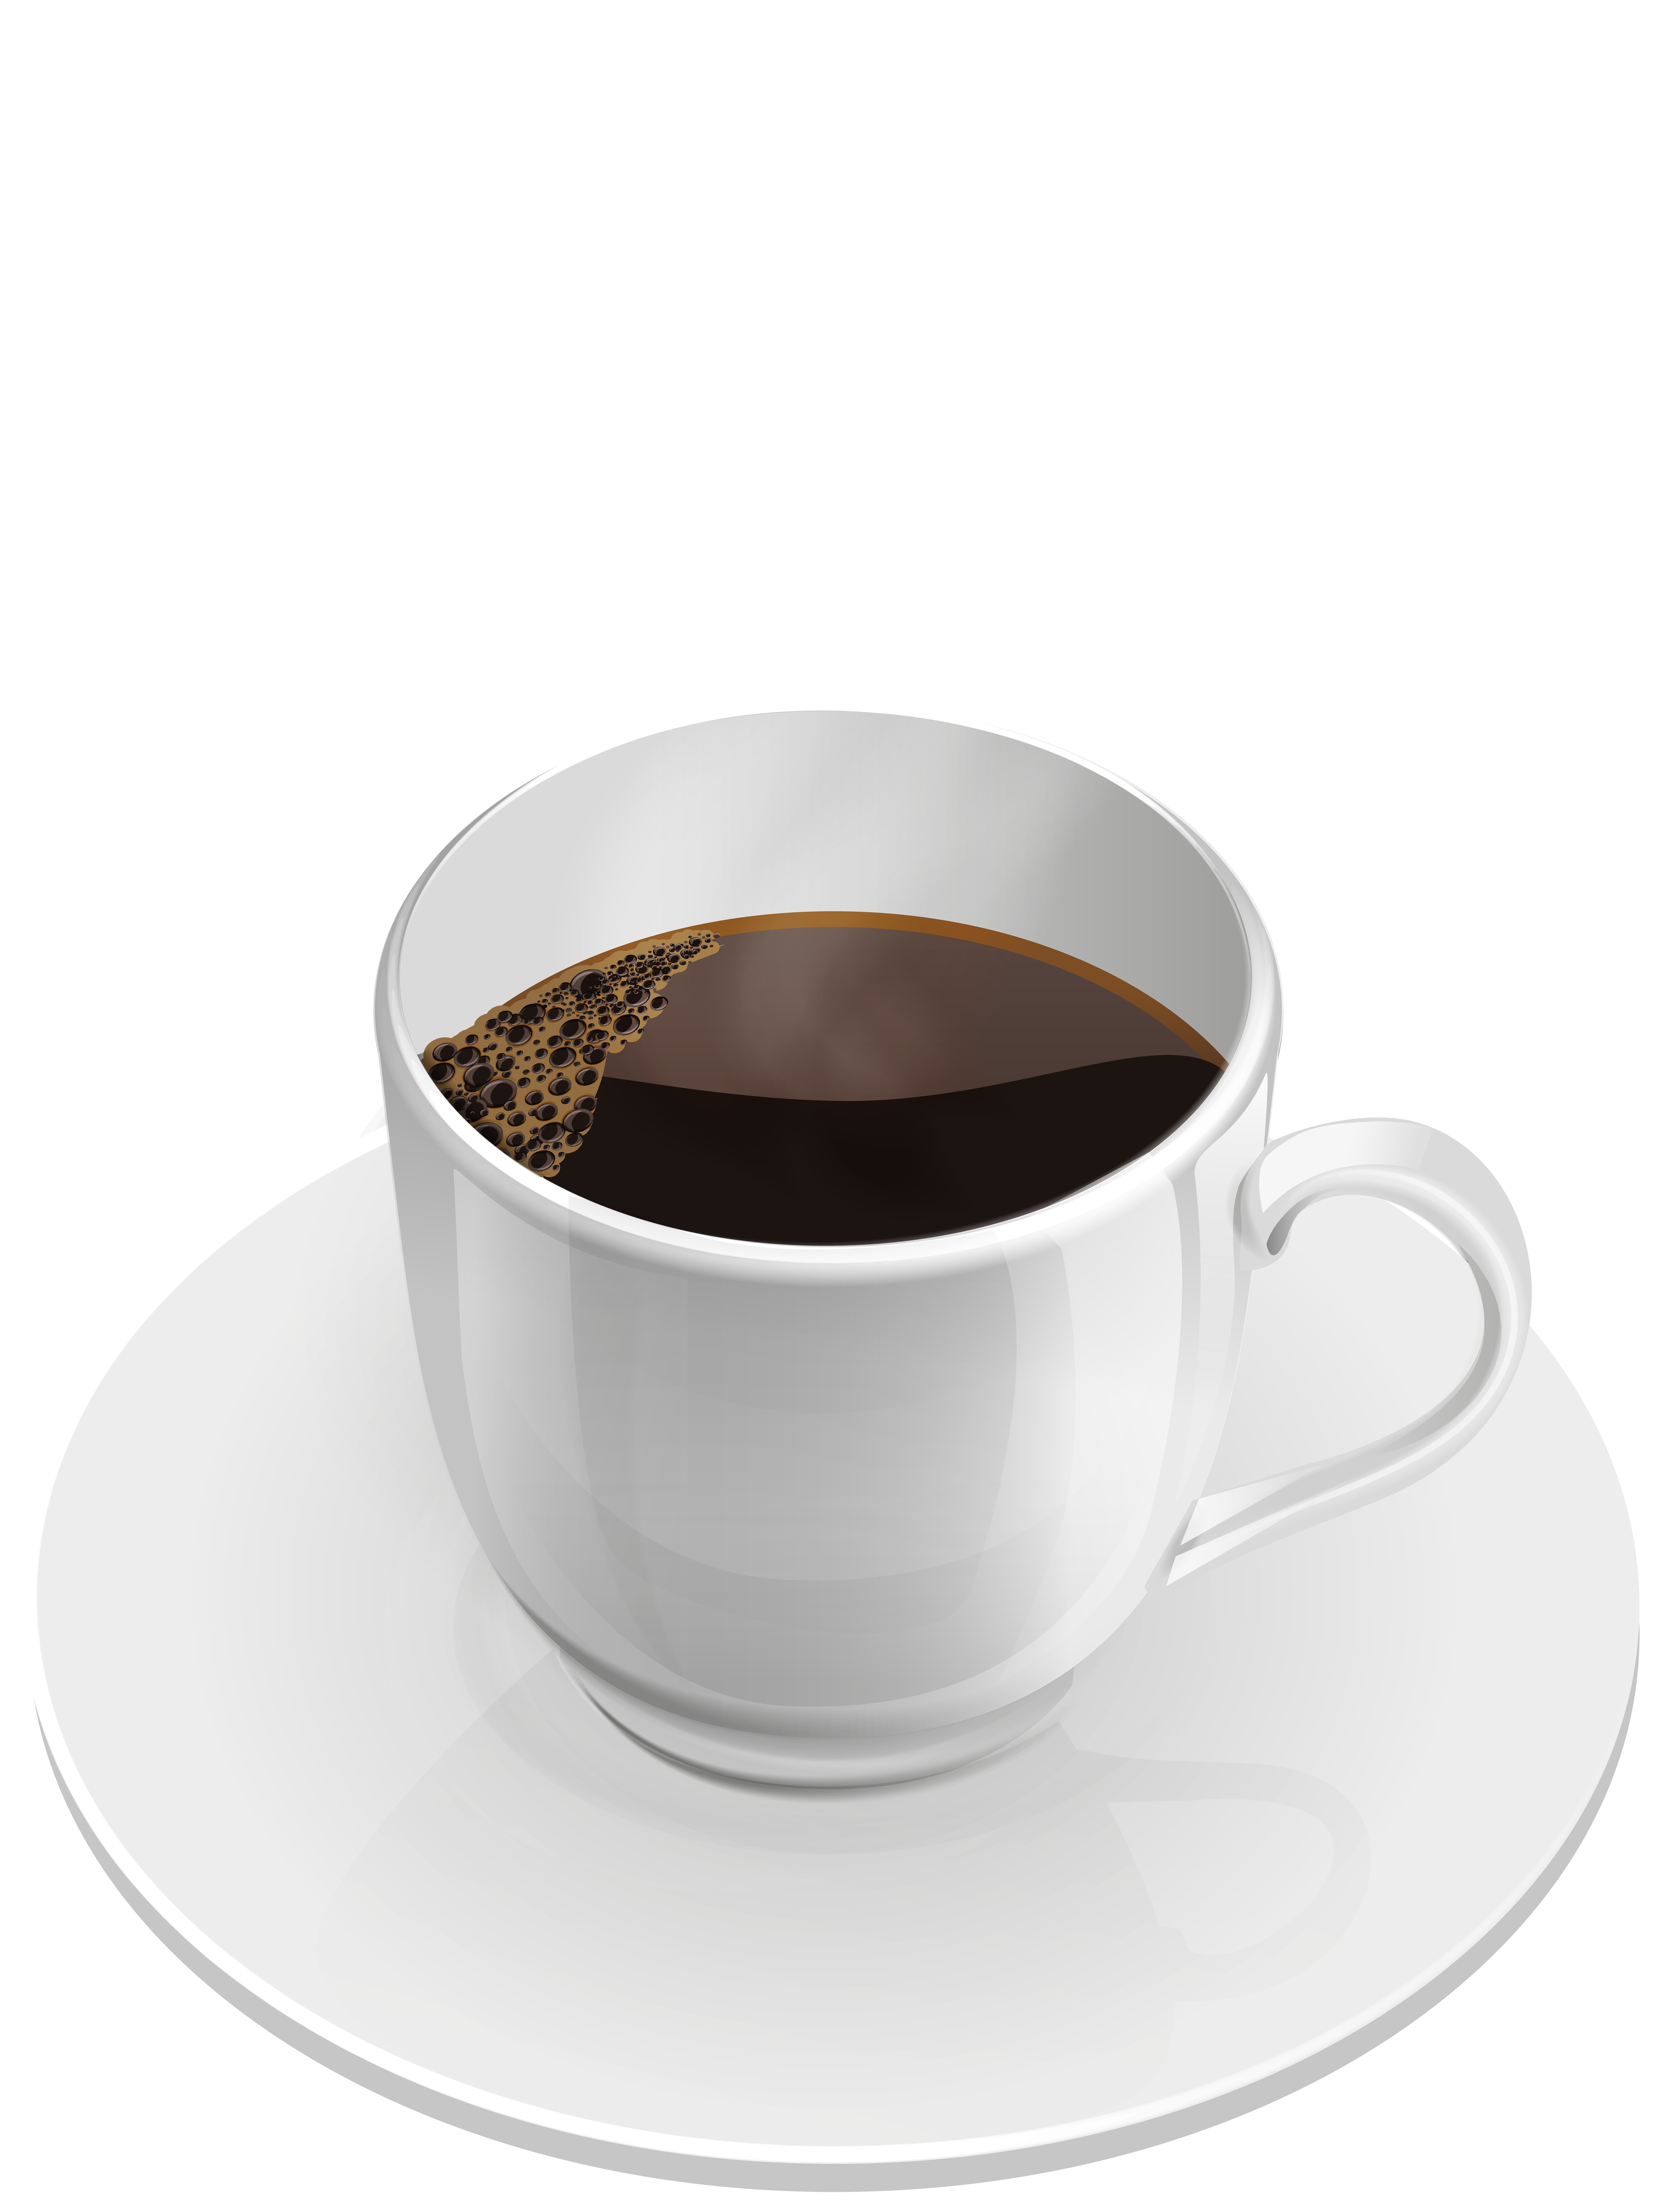 Hot Coffee Cup PNG Clip Art Image